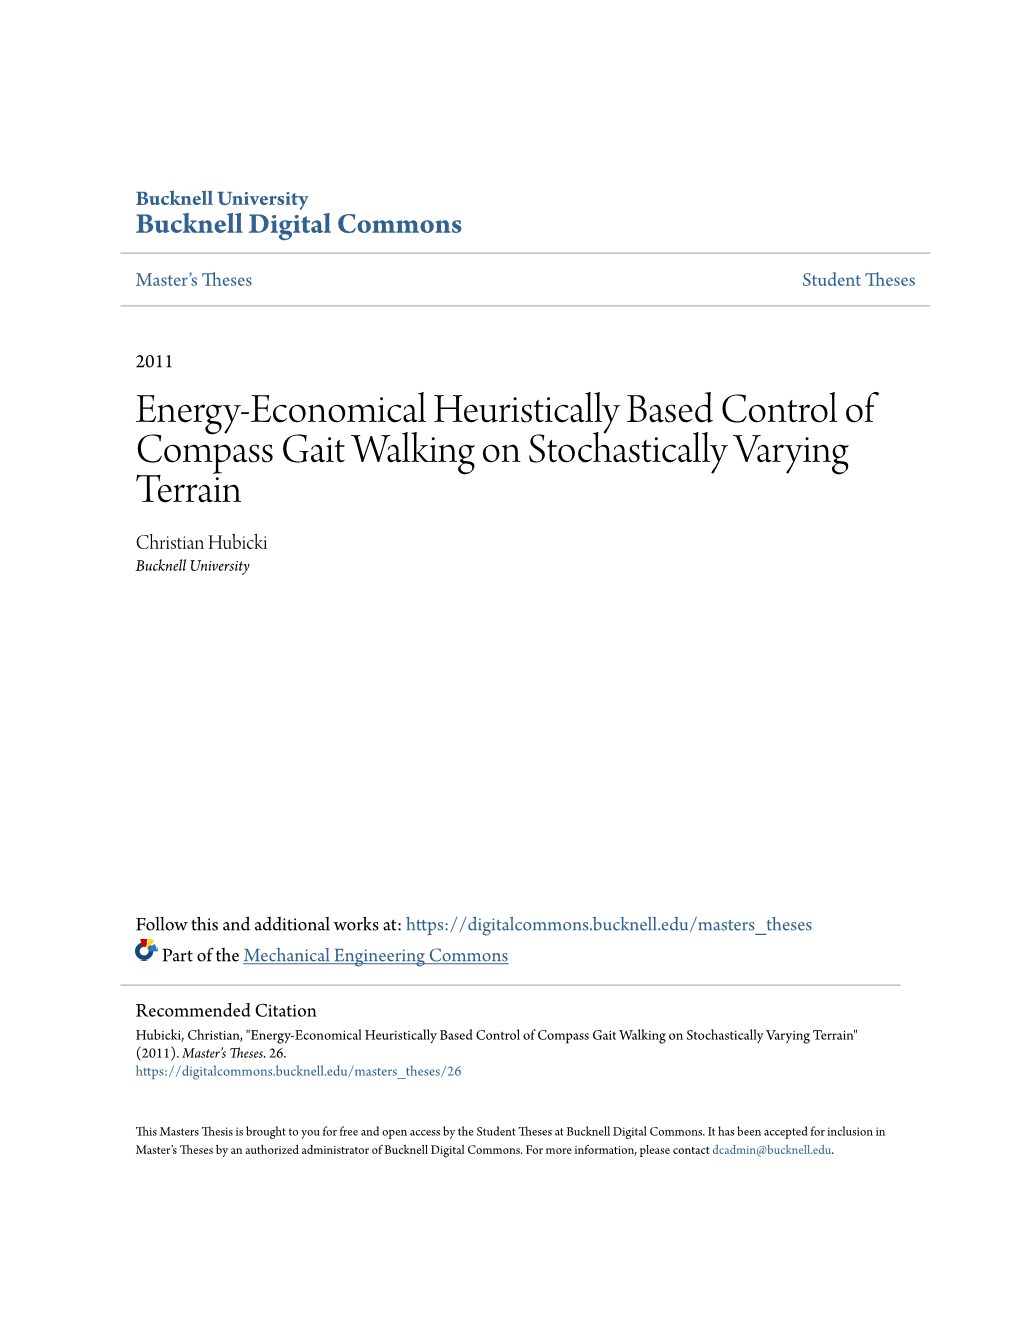 Energy-Economical Heuristically Based Control of Compass Gait Walking on Stochastically Varying Terrain Christian Hubicki Bucknell University